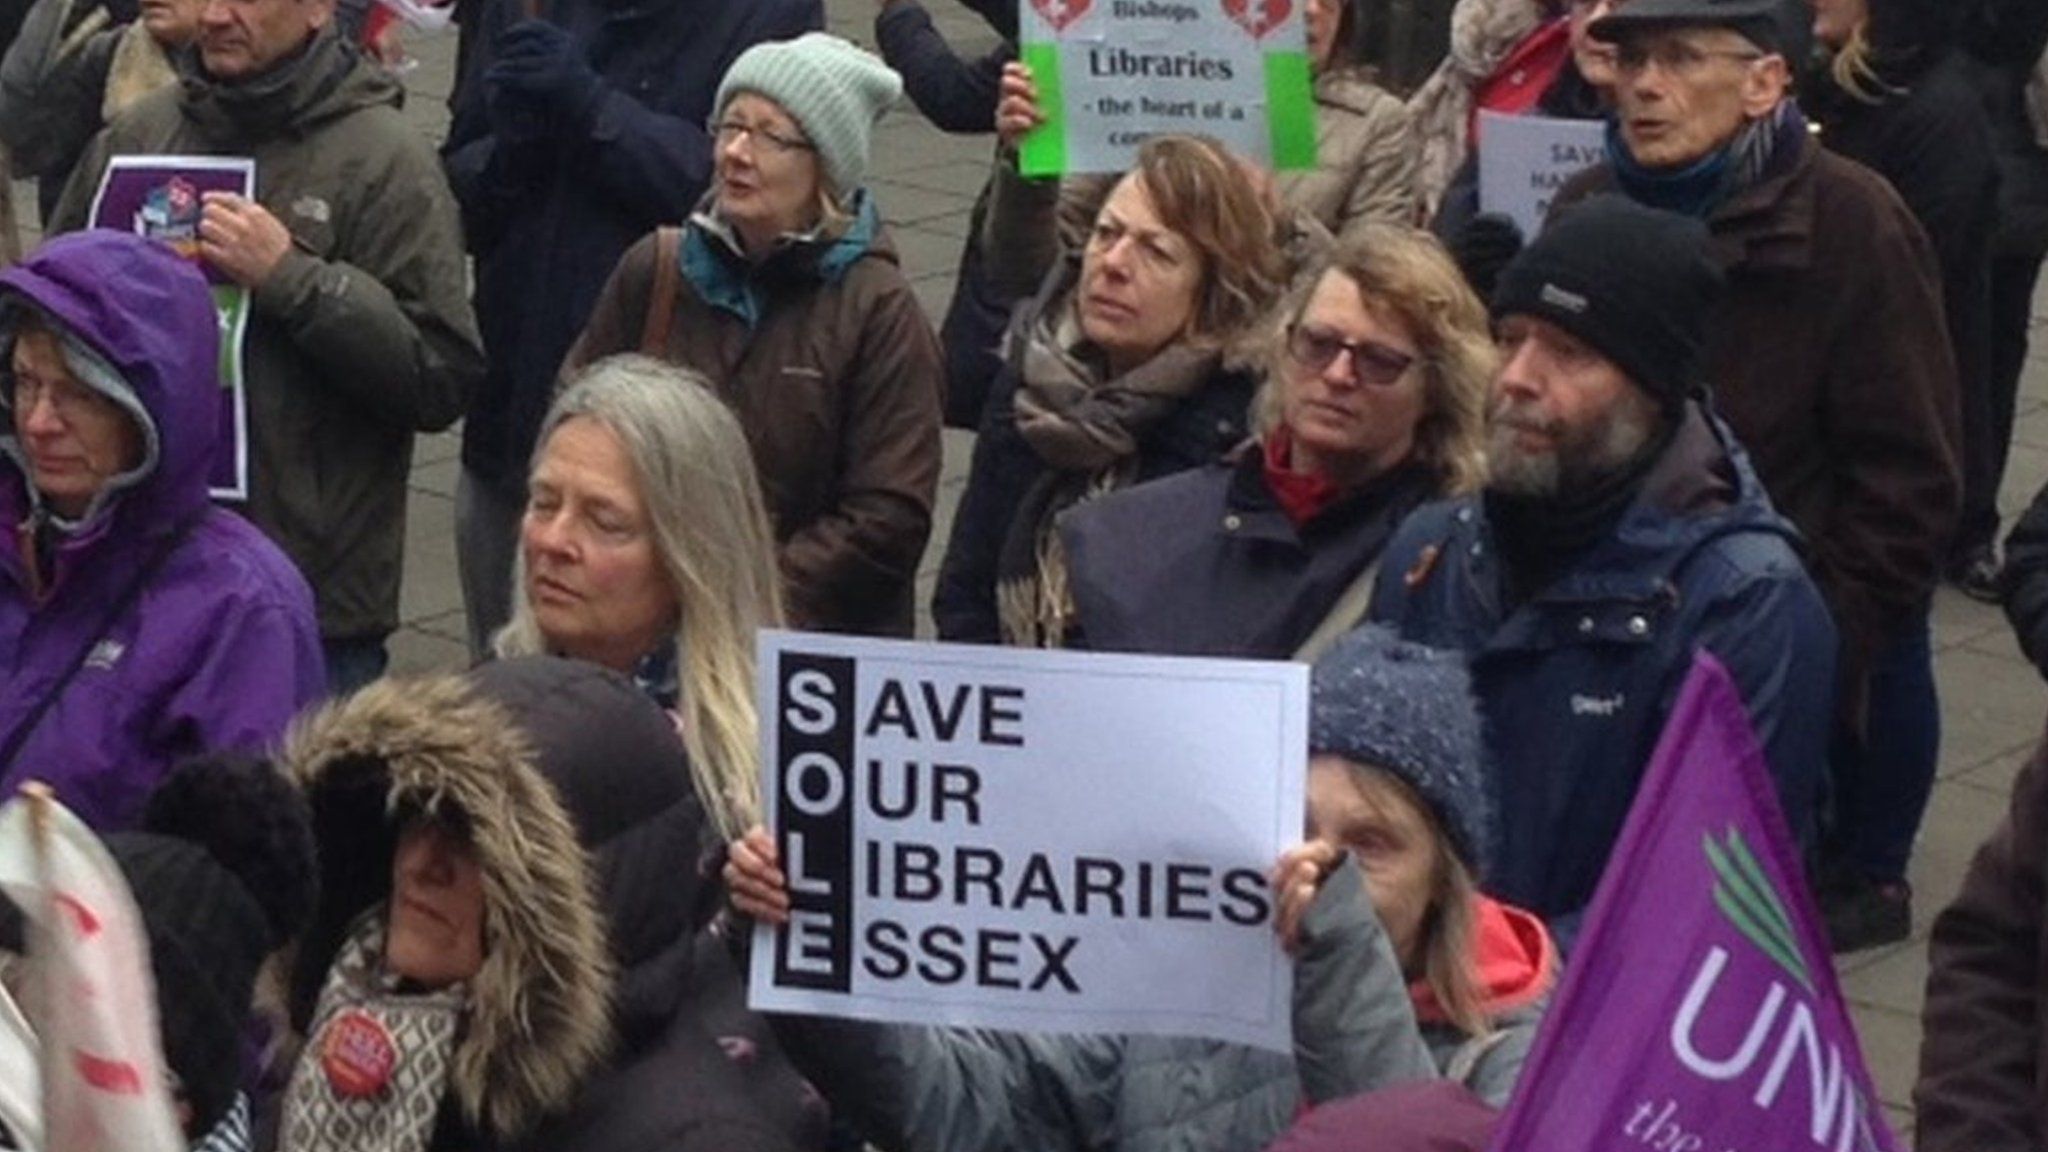 Protesters outside the library meeting